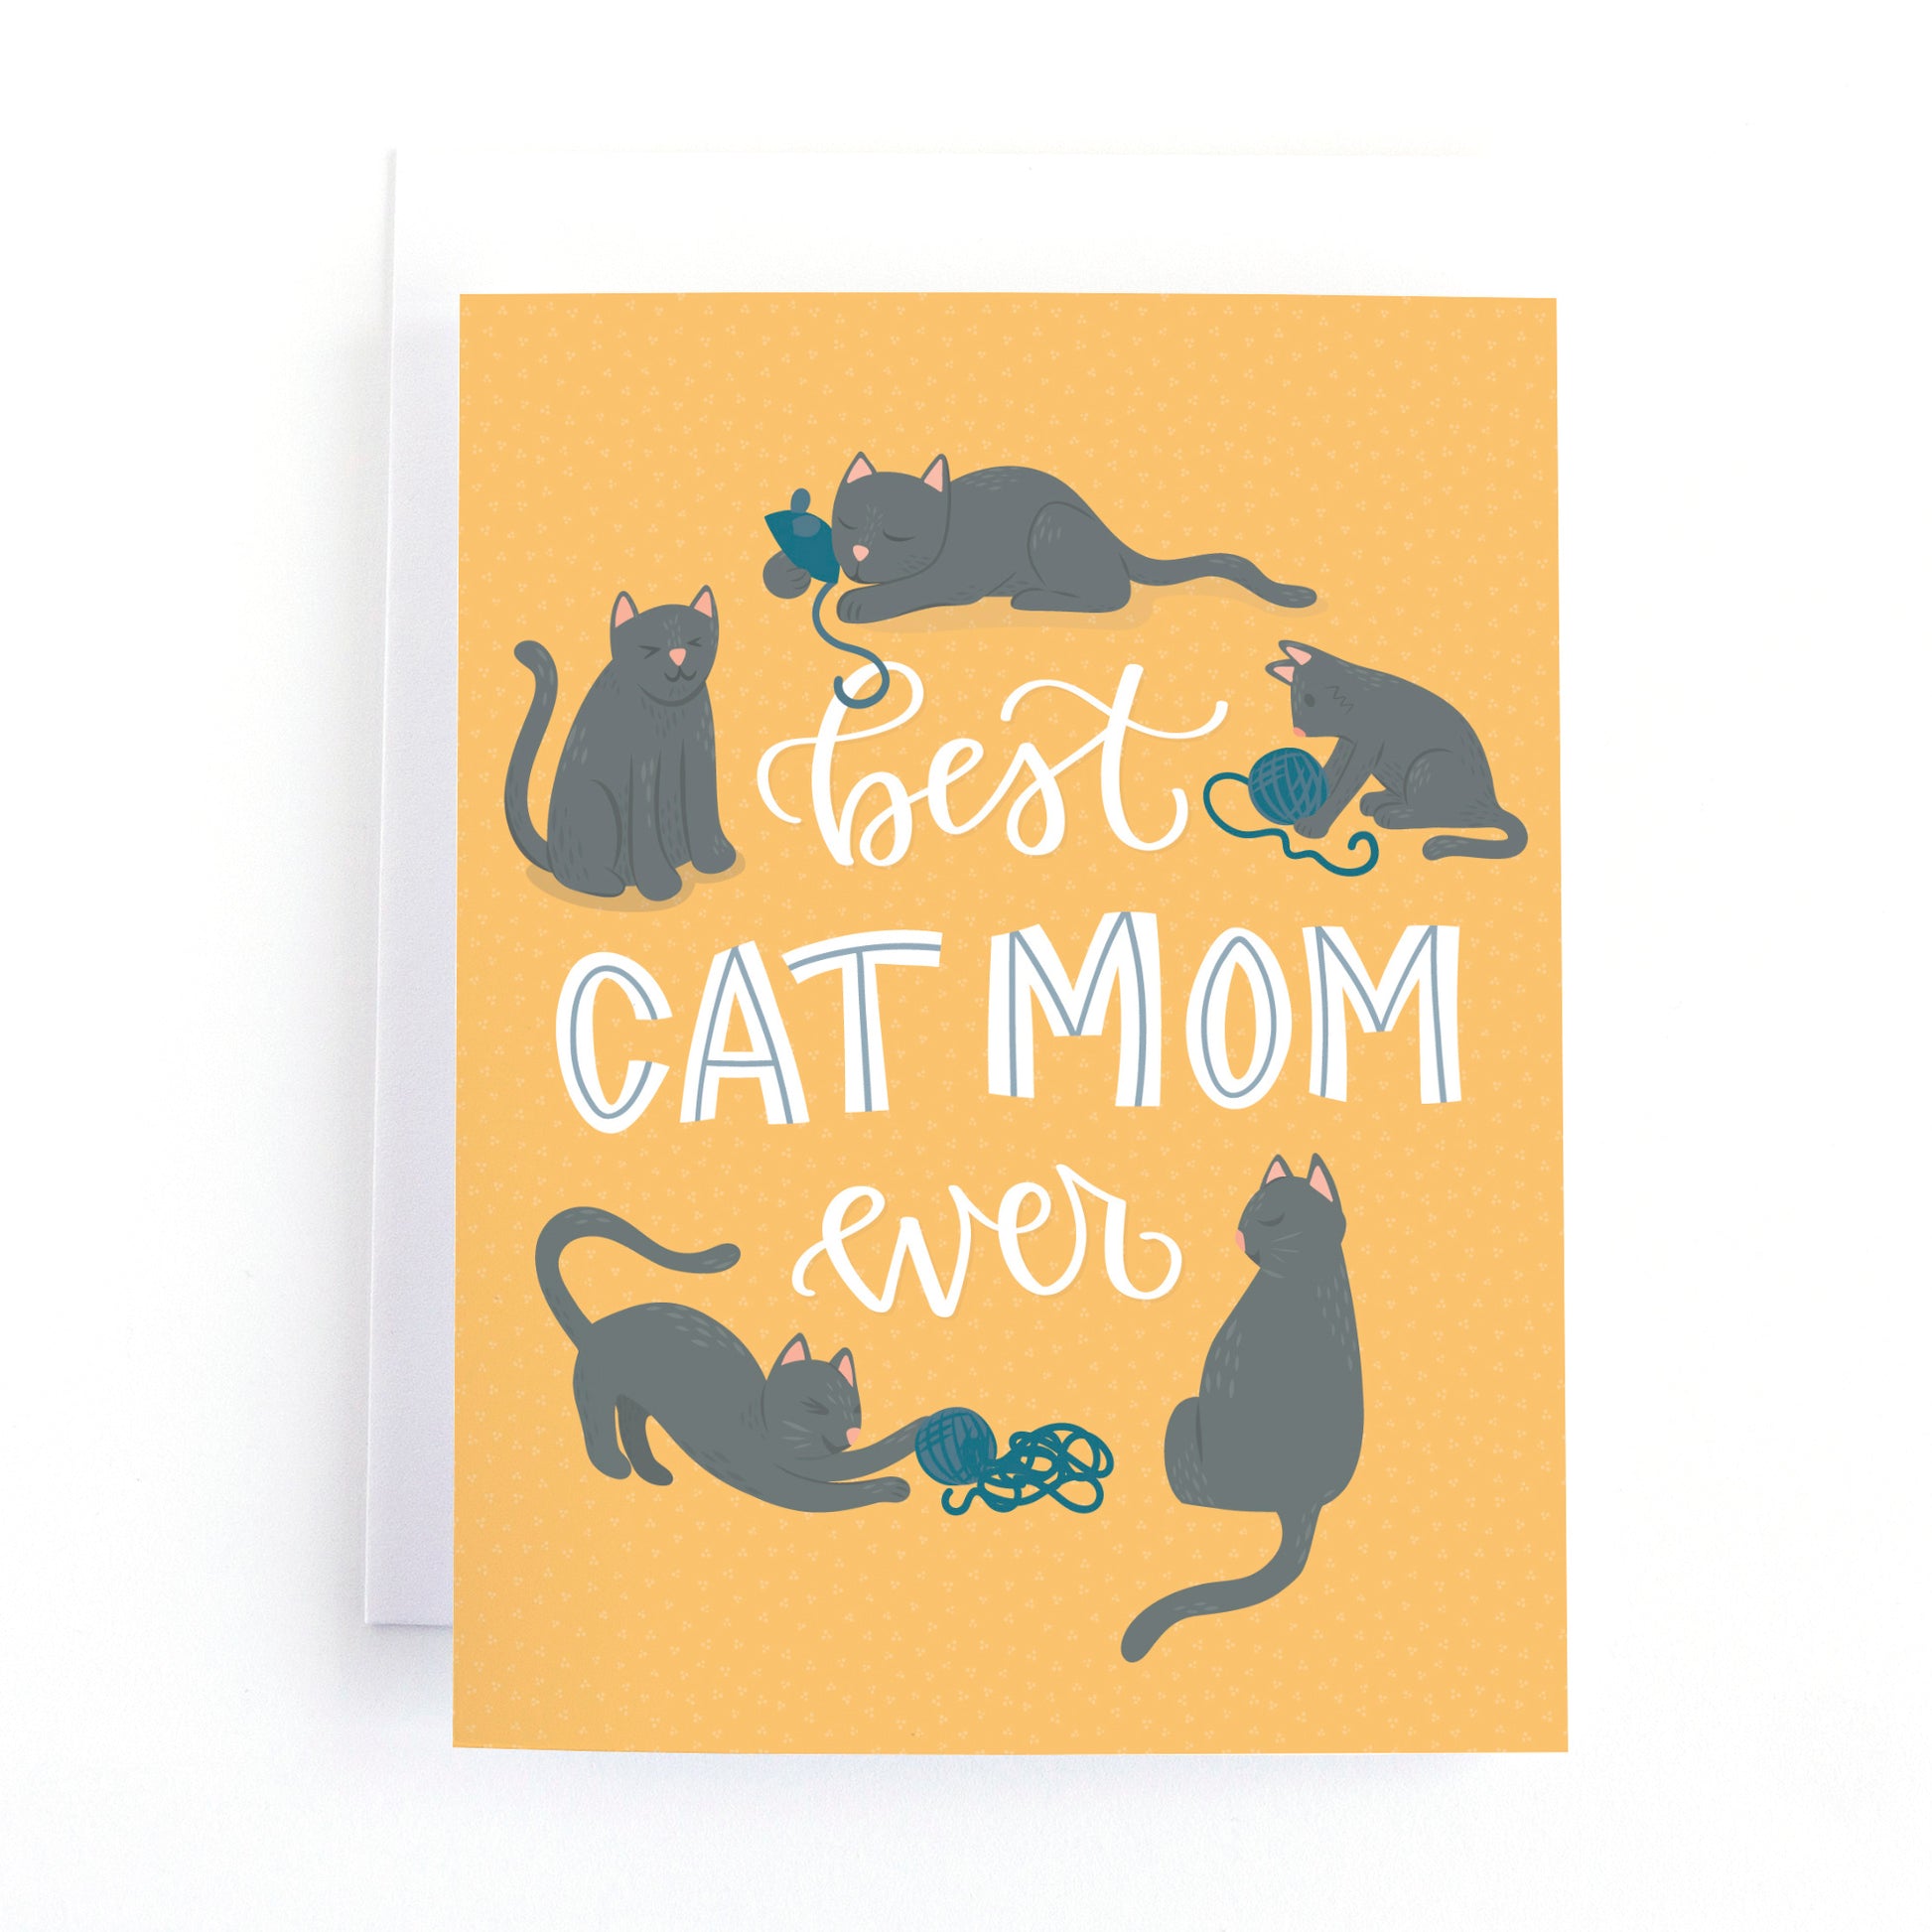 Cat Mom Mother's Day card with cute cats playing sround the text, Best Cat Mom Ever on a yellow background.